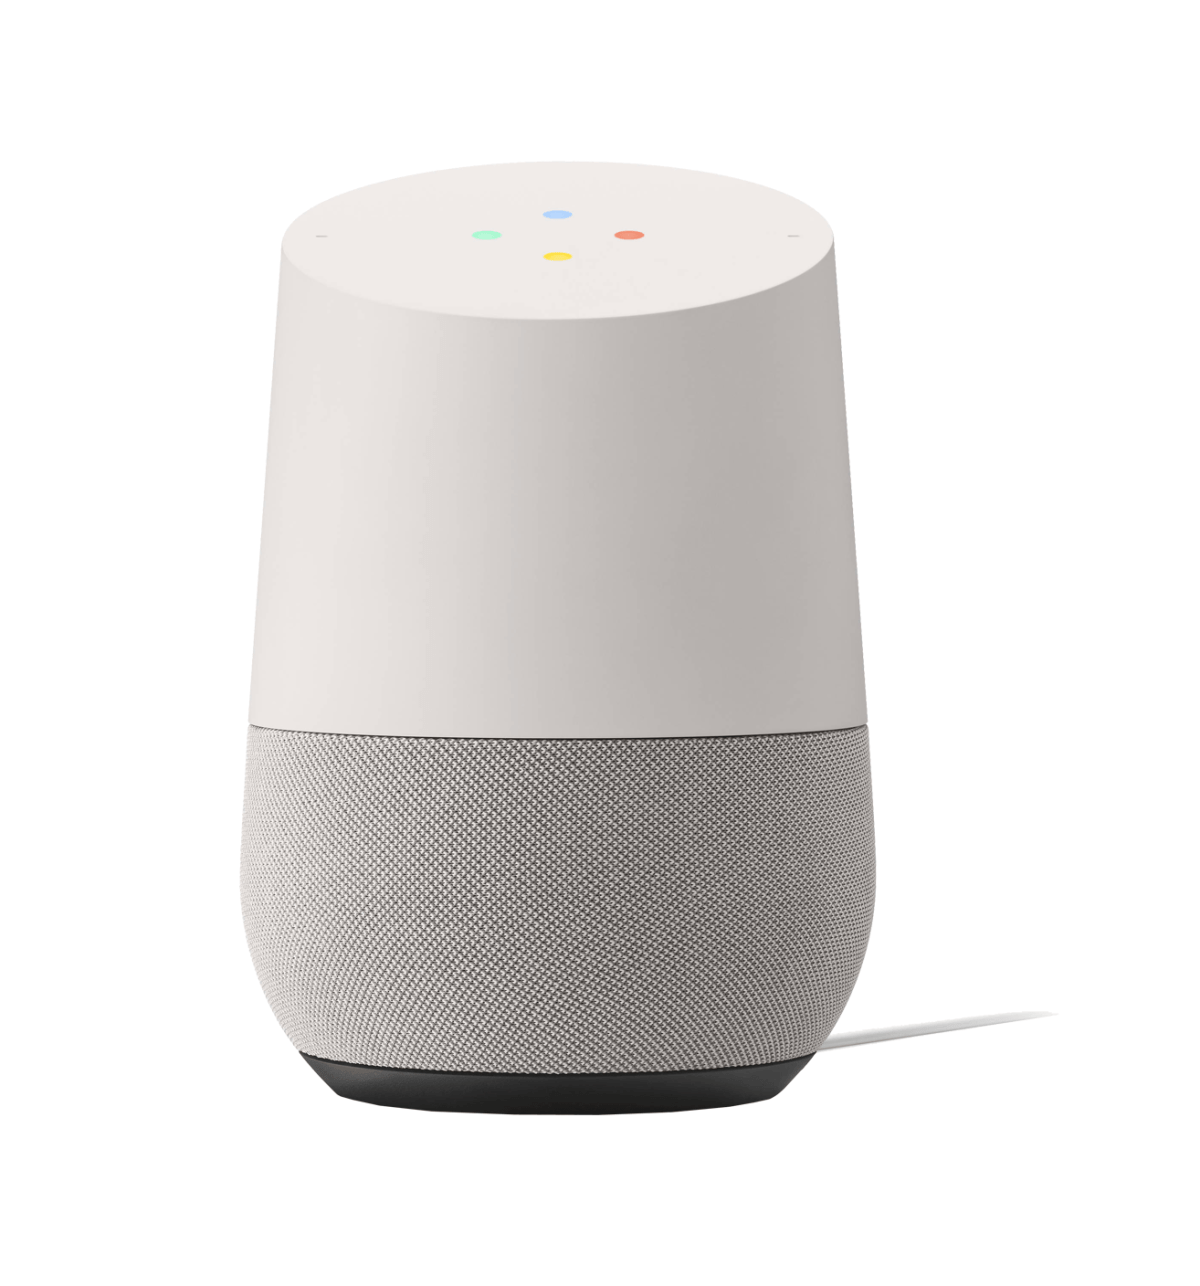 58A44Cad8F2A78.60159287 2 Google &Lt;Strong&Gt;Google Home White Slate Personal Assistant&Lt;/Strong&Gt; With Integrated Wifi Connectivity, Voice Recognition And Home Automation Support, The Google Home Wireless Speaker Will Connect To Your Wireless Network To Provide Control Of And Access To, Virtually All Of Your Smart Devices. It Can Play Music, Check The Weather And Traffic, Tell You Sports Scores, Control Your Smart Home Equipment And More. Using Far-Field Voice Recognition Technology And The Google Assistant, The Built-In Microphone Allows The Google Home To Recognize Your Voice And Perform The Requested Task In An Instant. You Can Control The Google Home By Voice, With The Google Home App, Or Use The Touch Surface On Top Of The Unit. Voice Control Can Be Disabled With The Rear-Mounted Mute Button. At Only 3.79-Inches Wide And 5.62-Inches Tall, The Google Home Is Designed To Fit Nearly Anywhere In Most Decors. To Further Blend Into Your Home, The Slate Fabric Base Is Interchangeable With Six Separately Available Colors. Google Home White Slate Personal Assistant